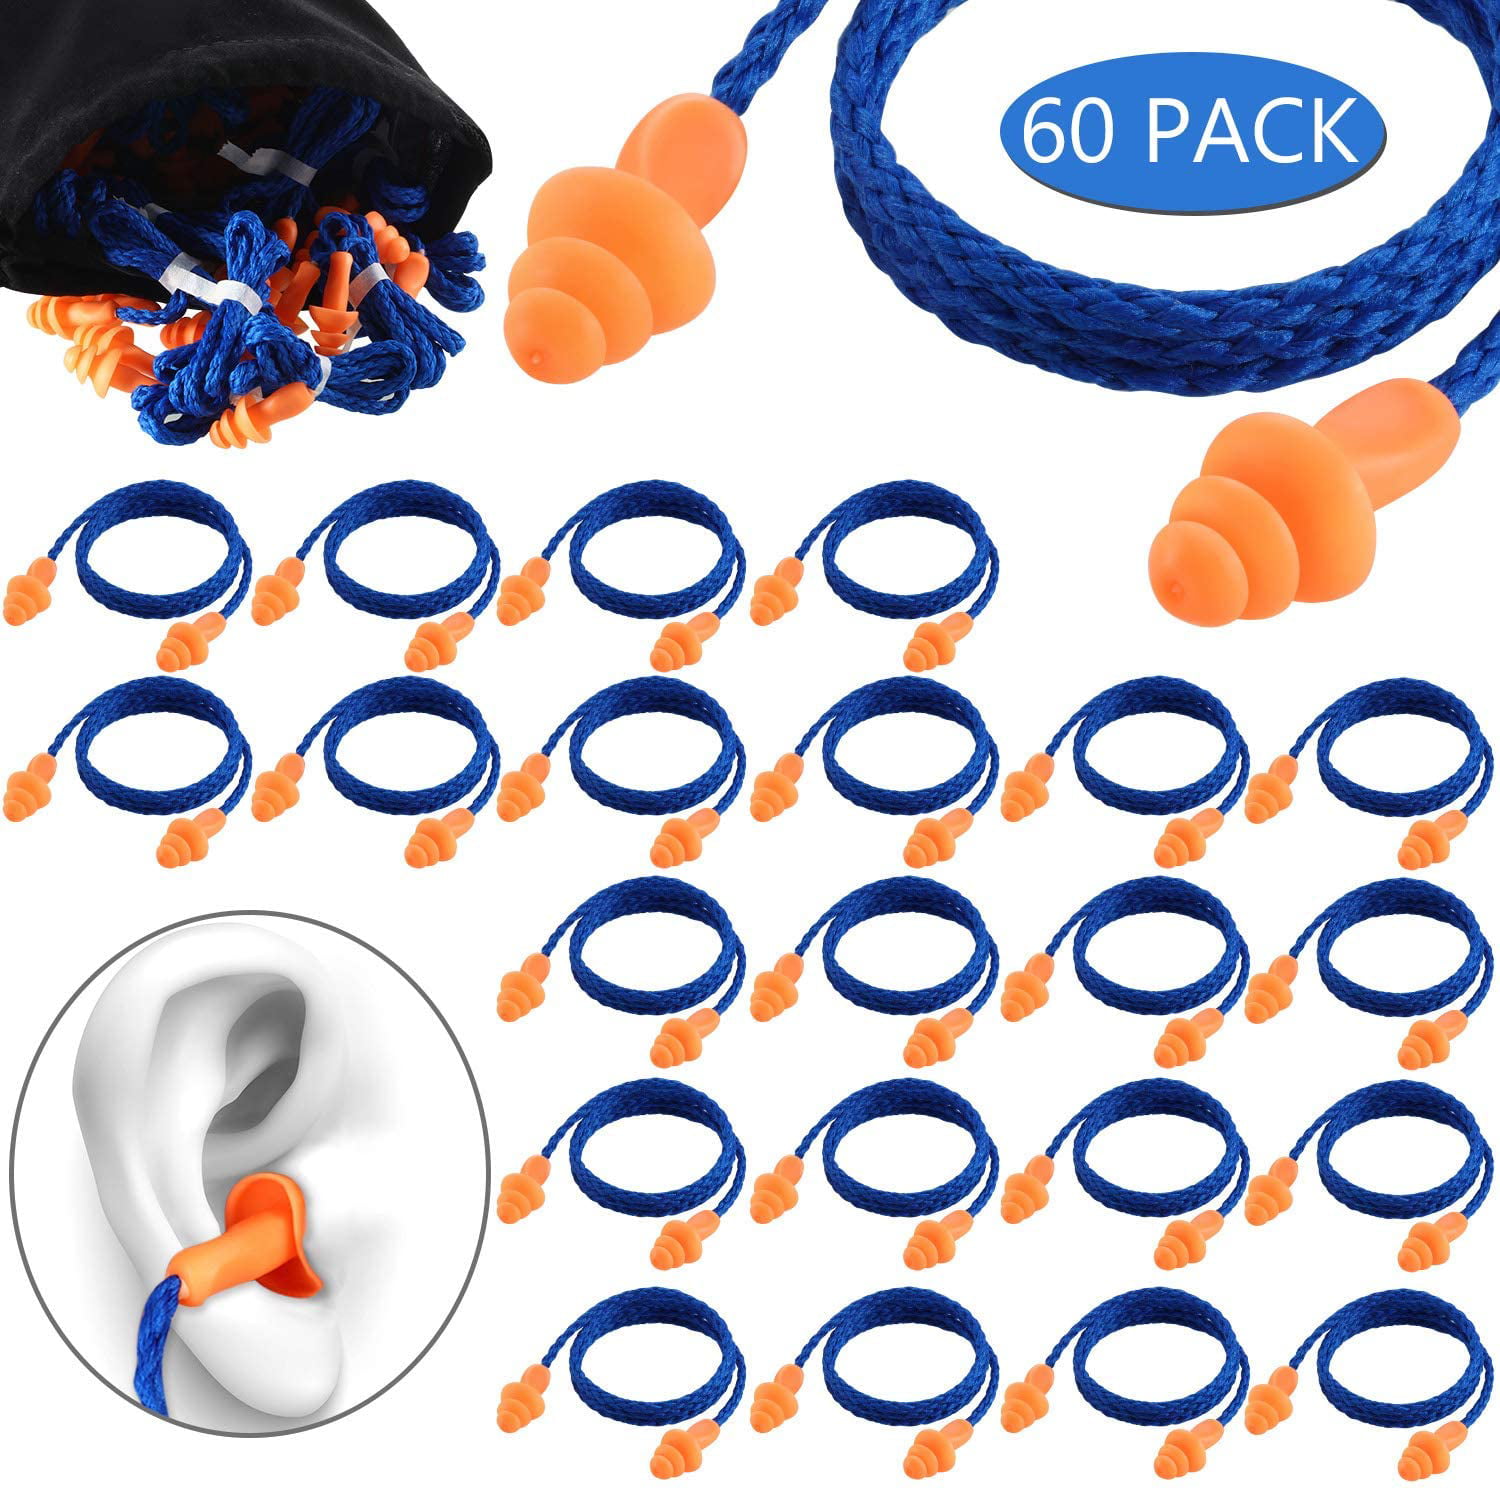 6PAIRS Soft Silicone Earplus Swimmers Flexible Ear Plugs for Swimming Sleeping 